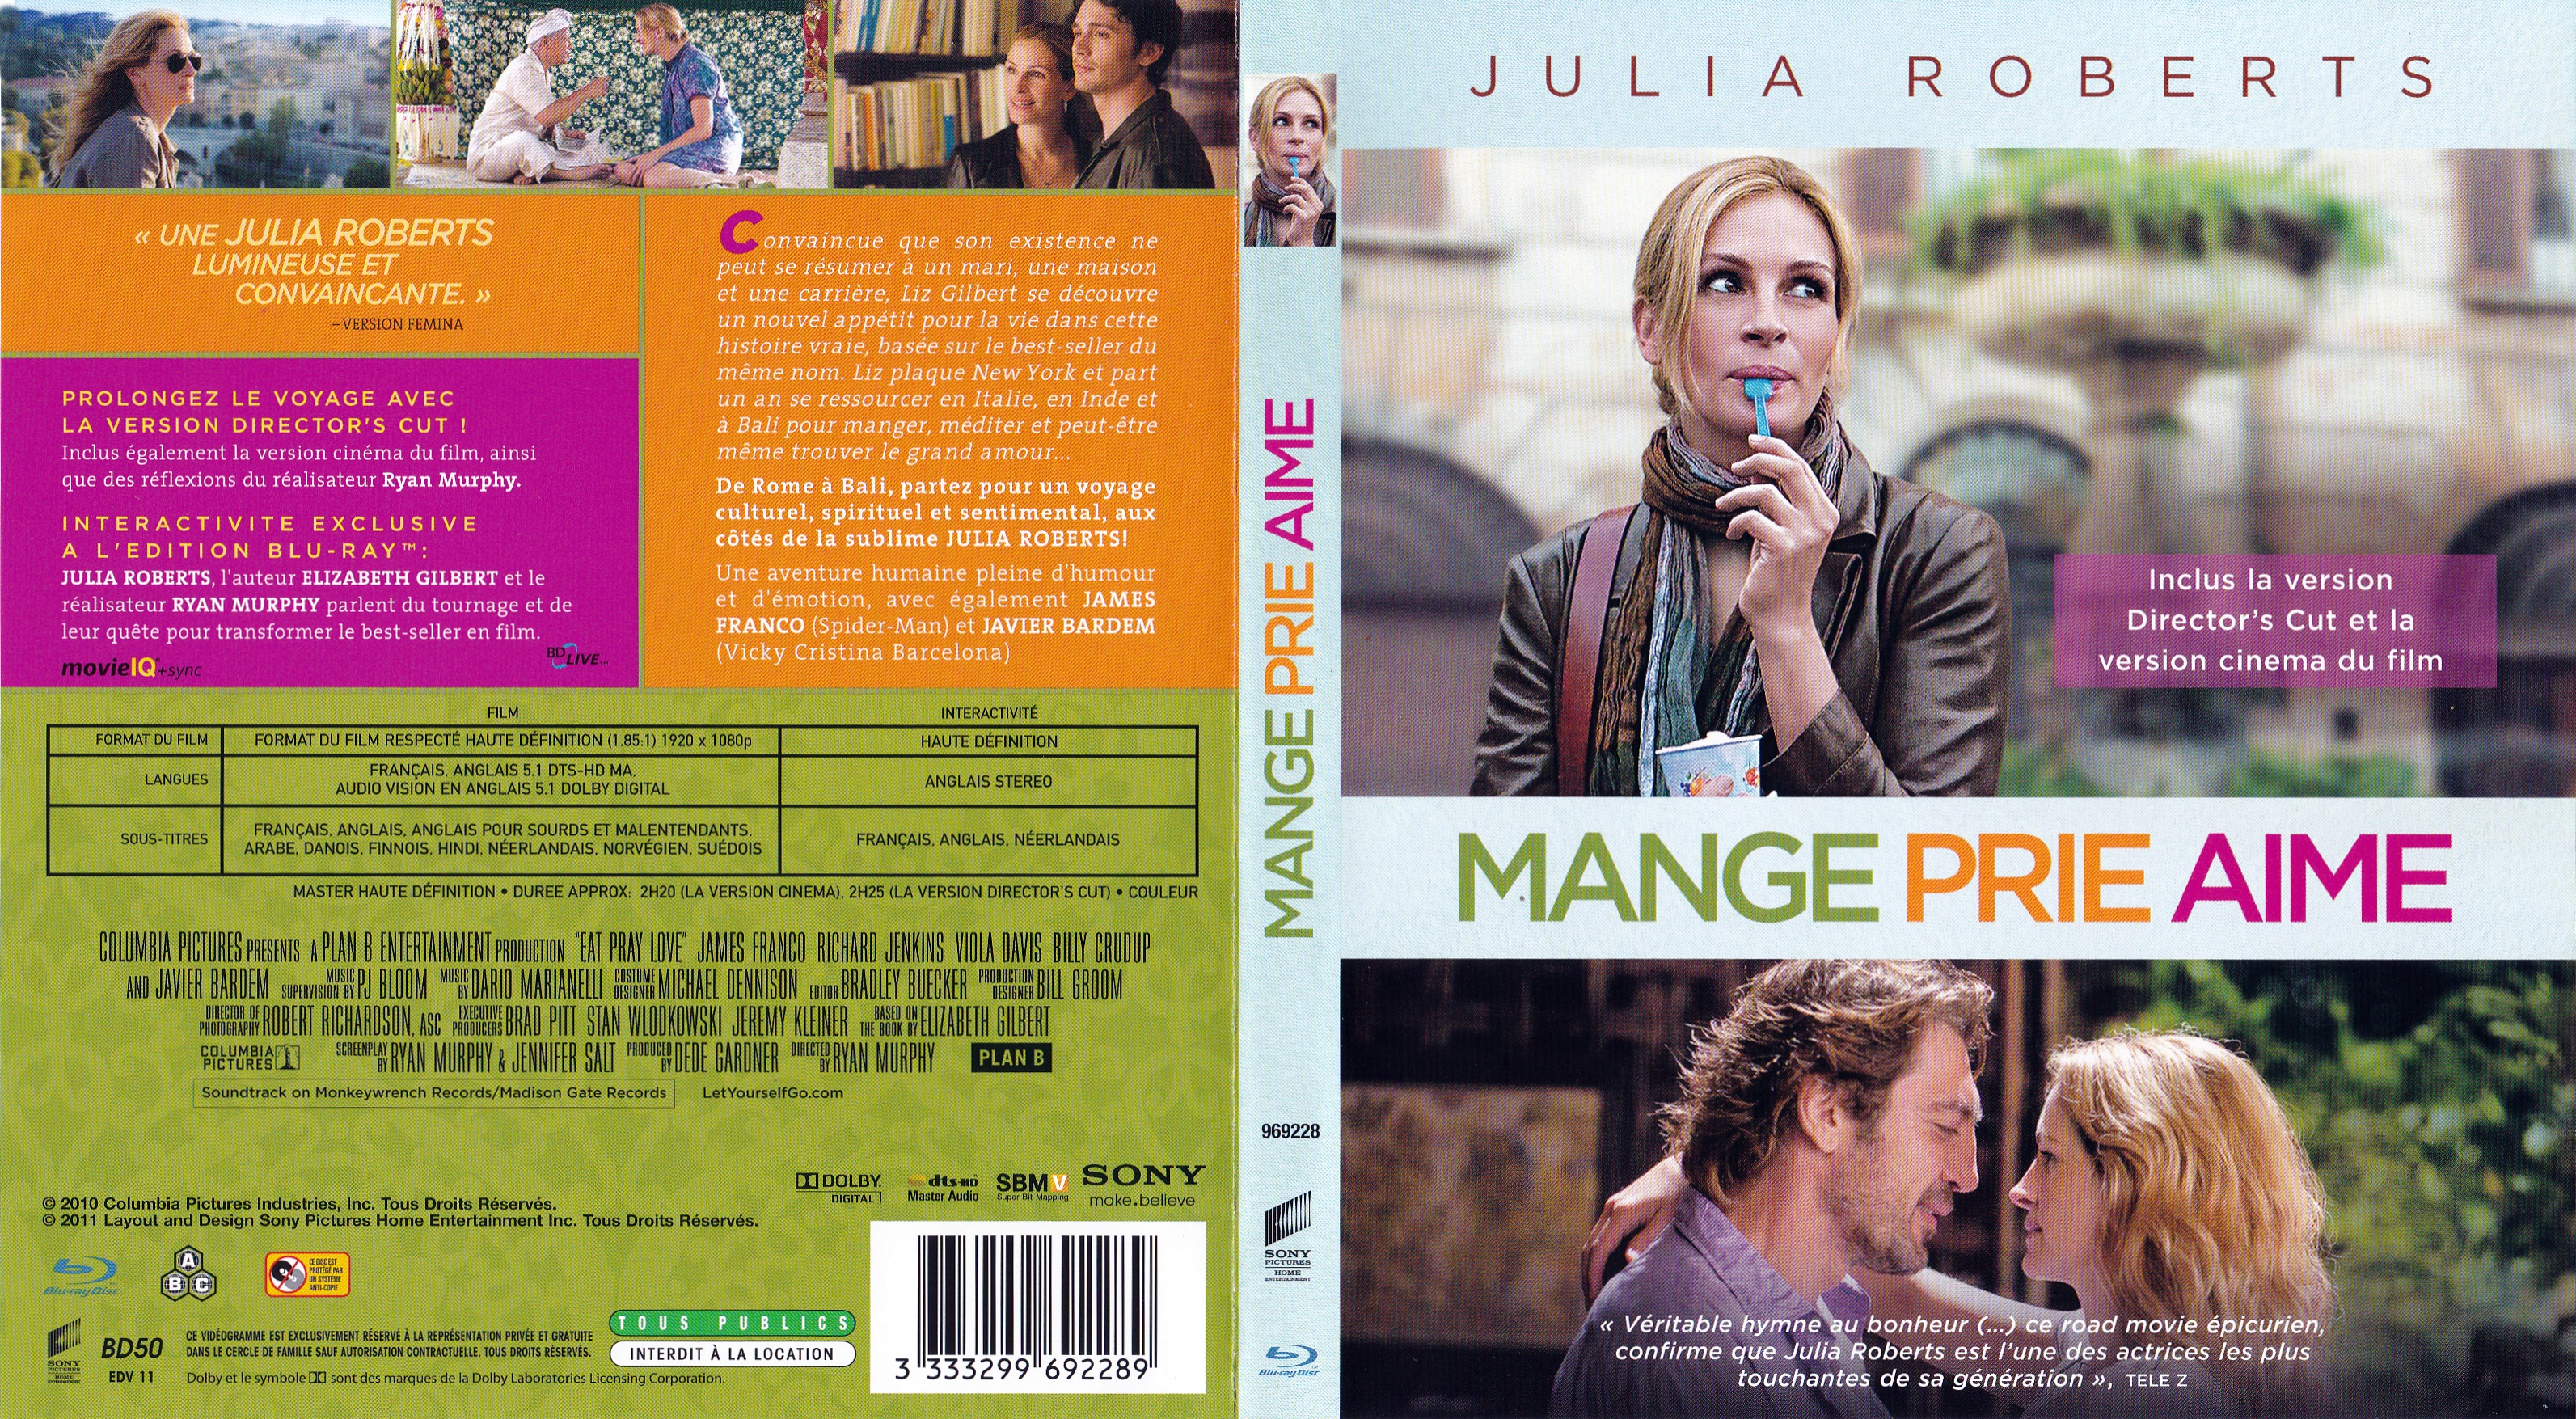 Jaquette DVD Mange prie aime (BLU-RAY)